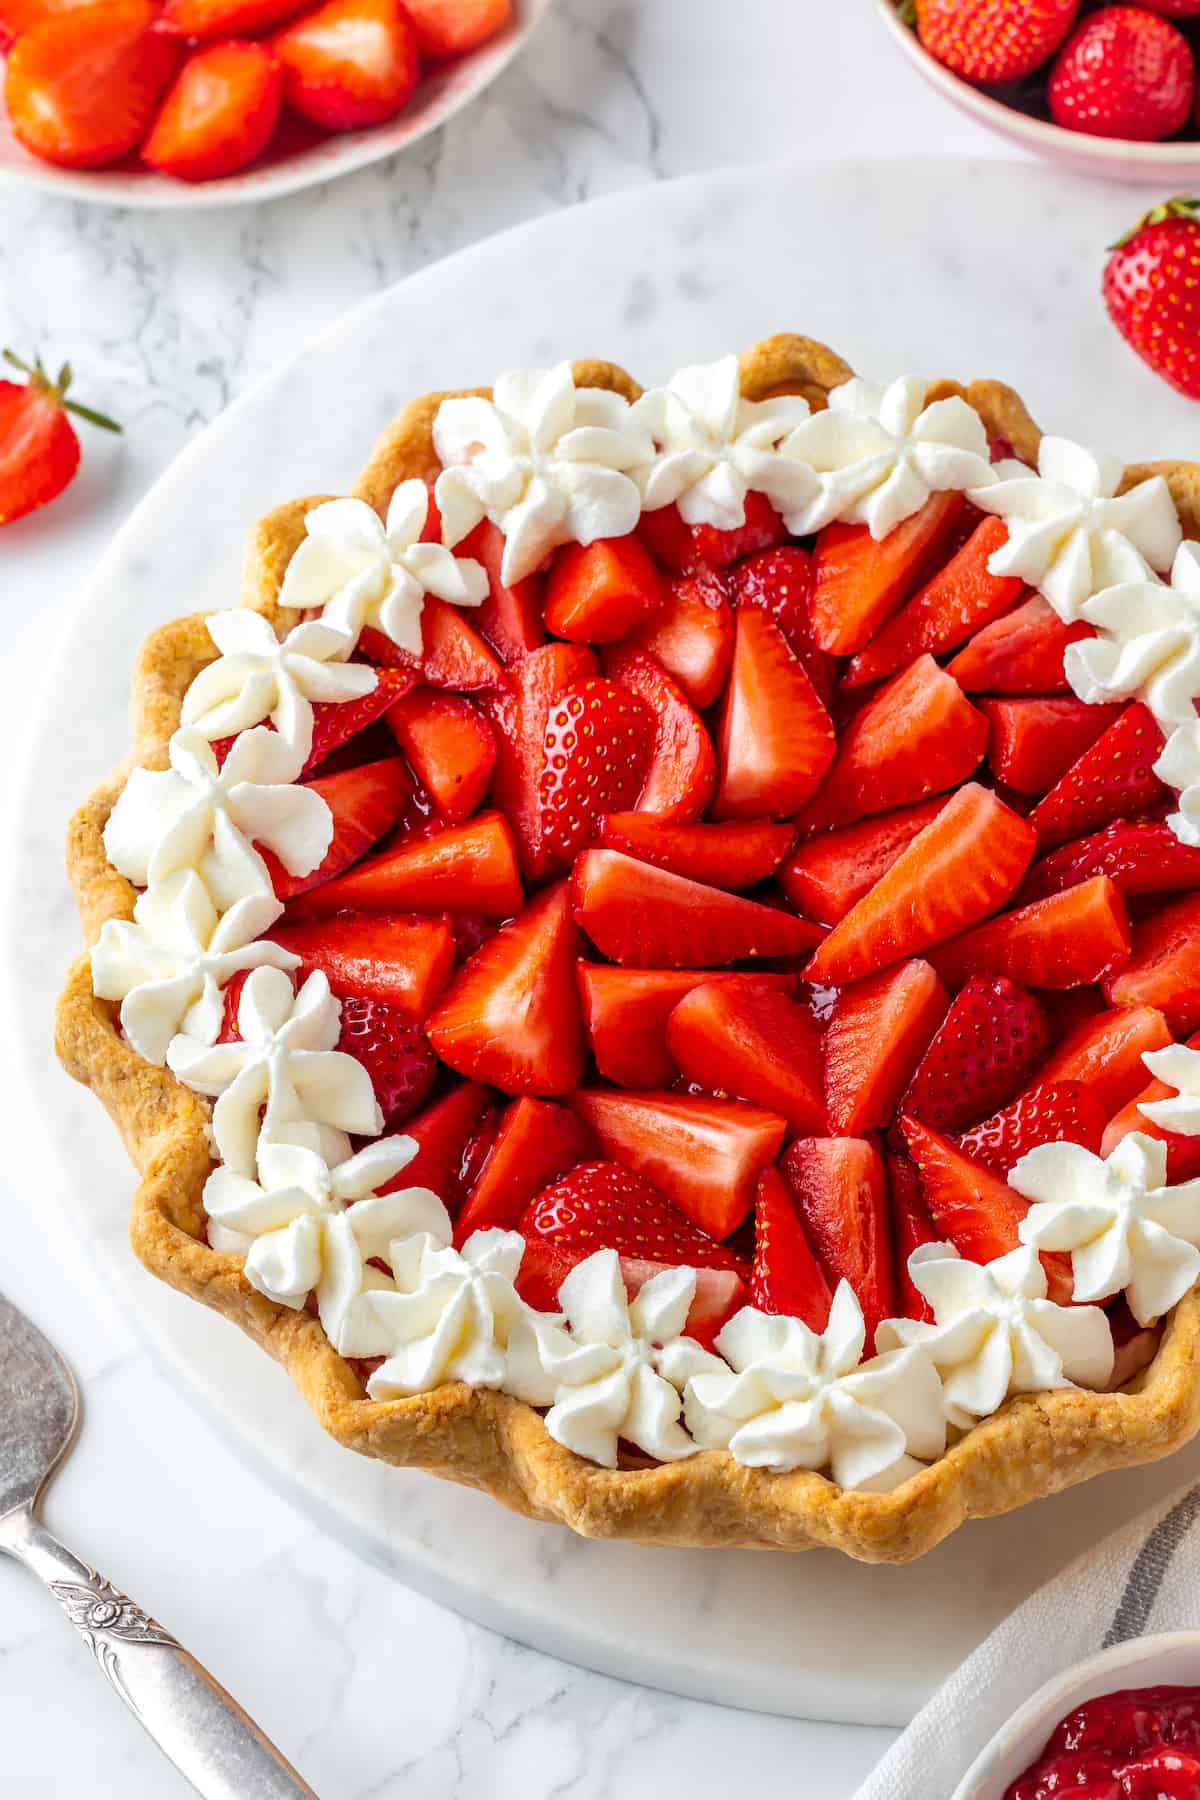 Whole strawberry cream pie surrounded by bowls of fresh strawberries and jam